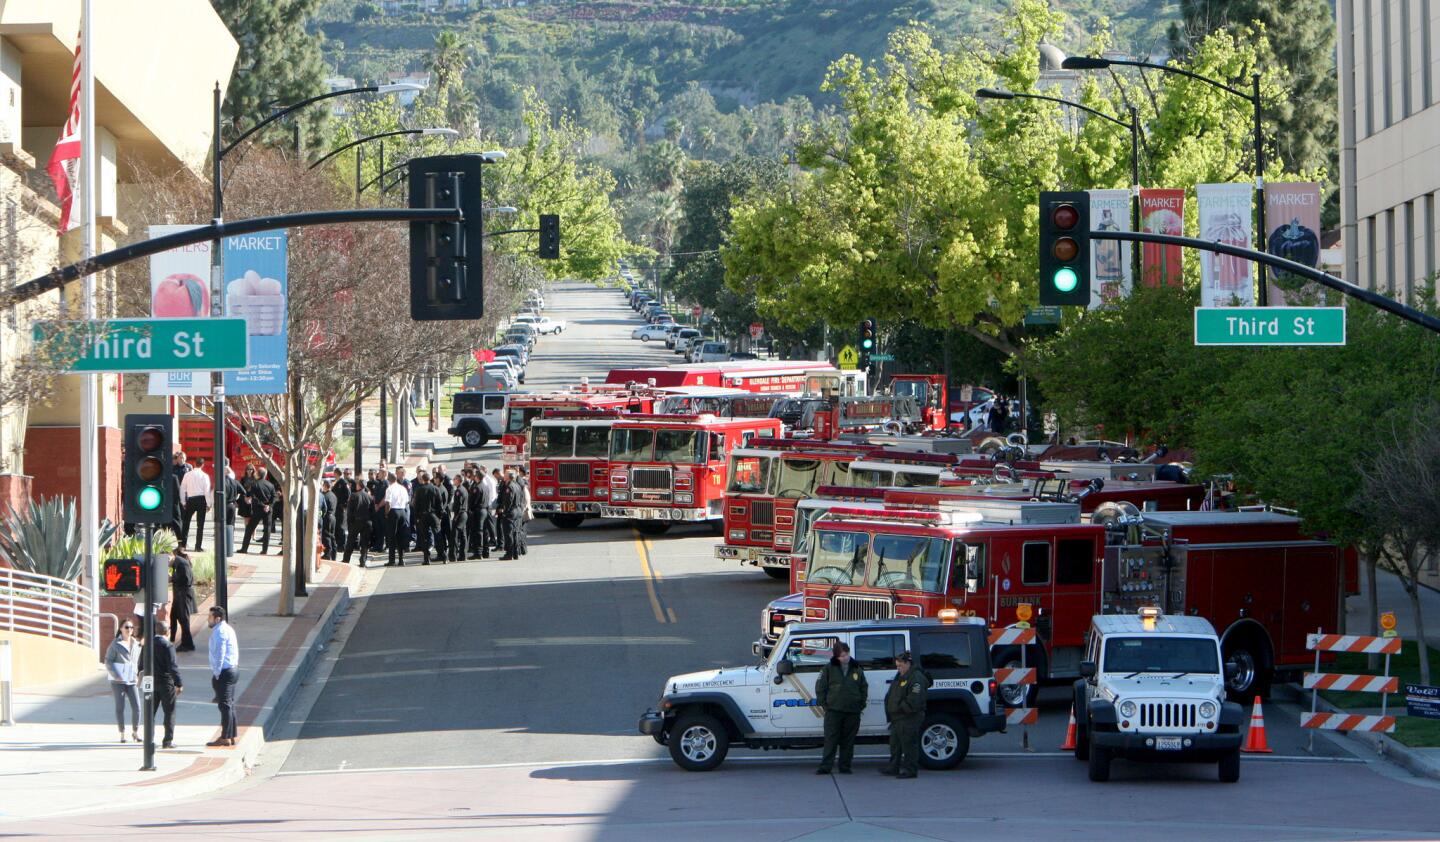 Photo Gallery: Burbank Fire Department lays to rest one of its own